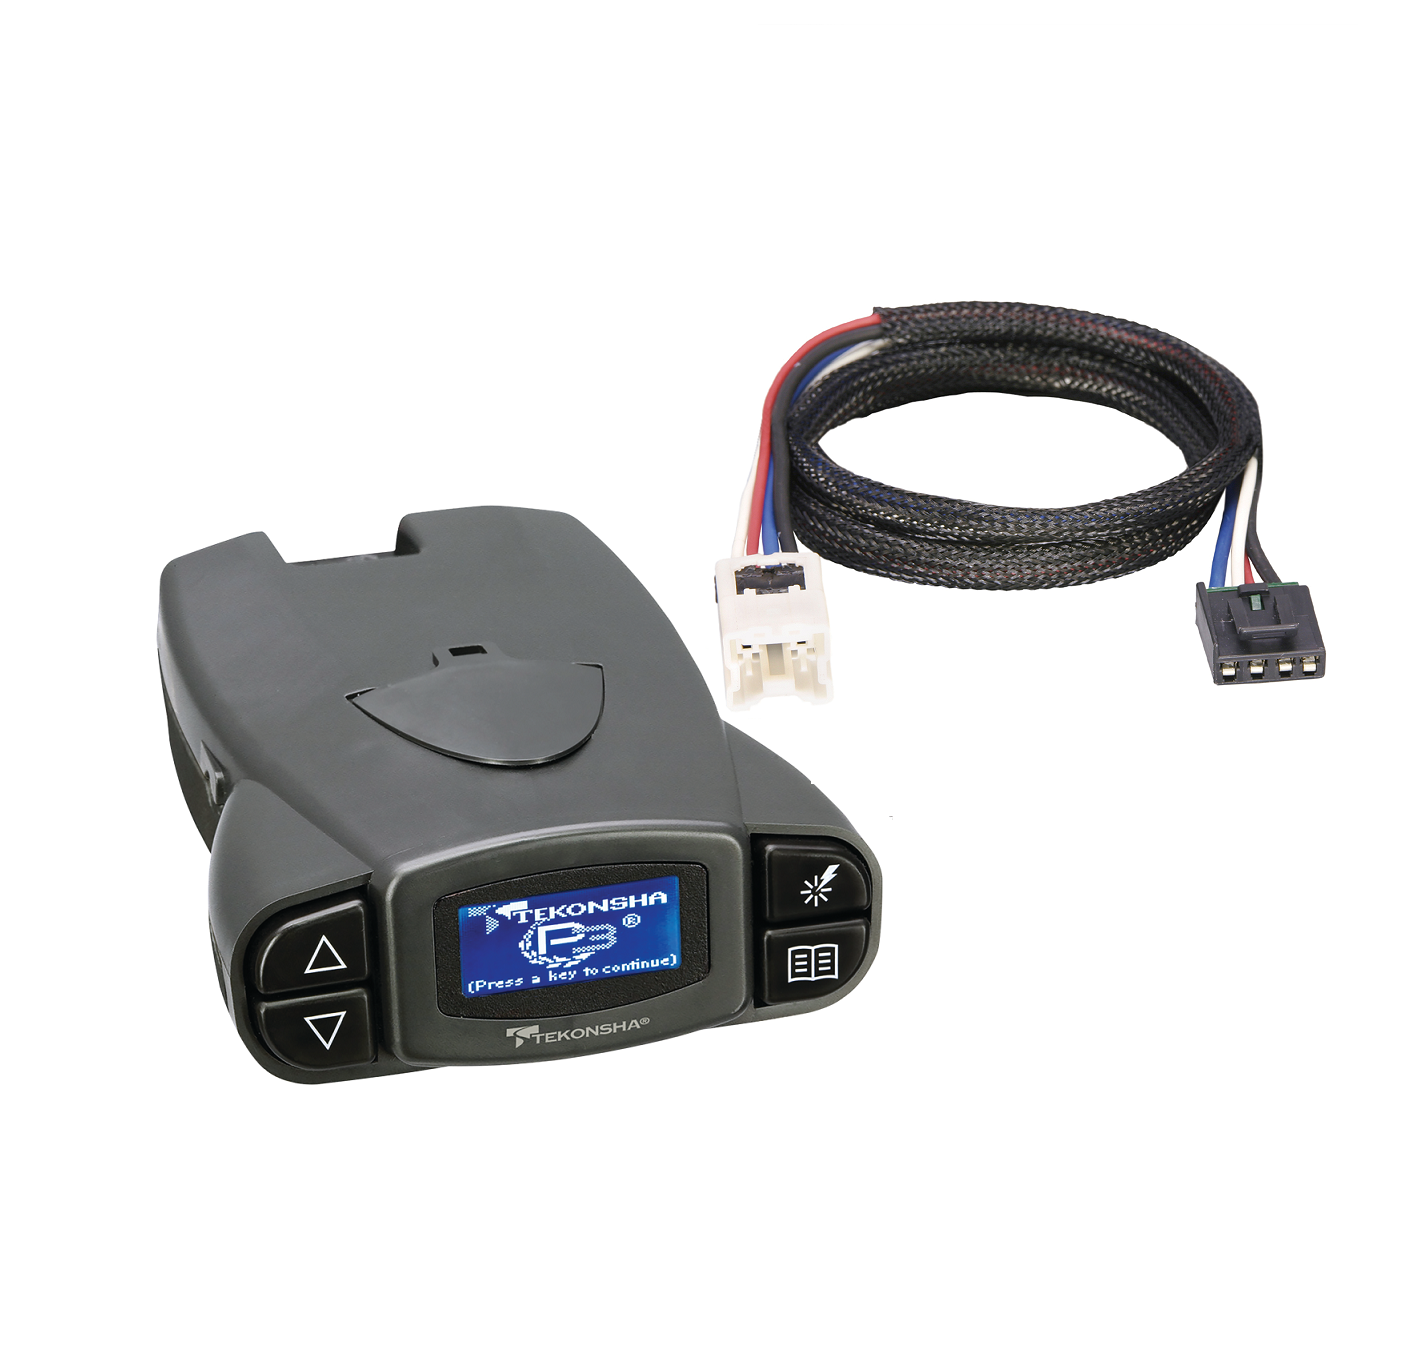 2013-2020 Infiniti QX60 3050 Tekonsha Prodigy P3 Proportional Brake Controller for Trailers with 1-4 Axles 90195 w/ Plug-N-Play Wire